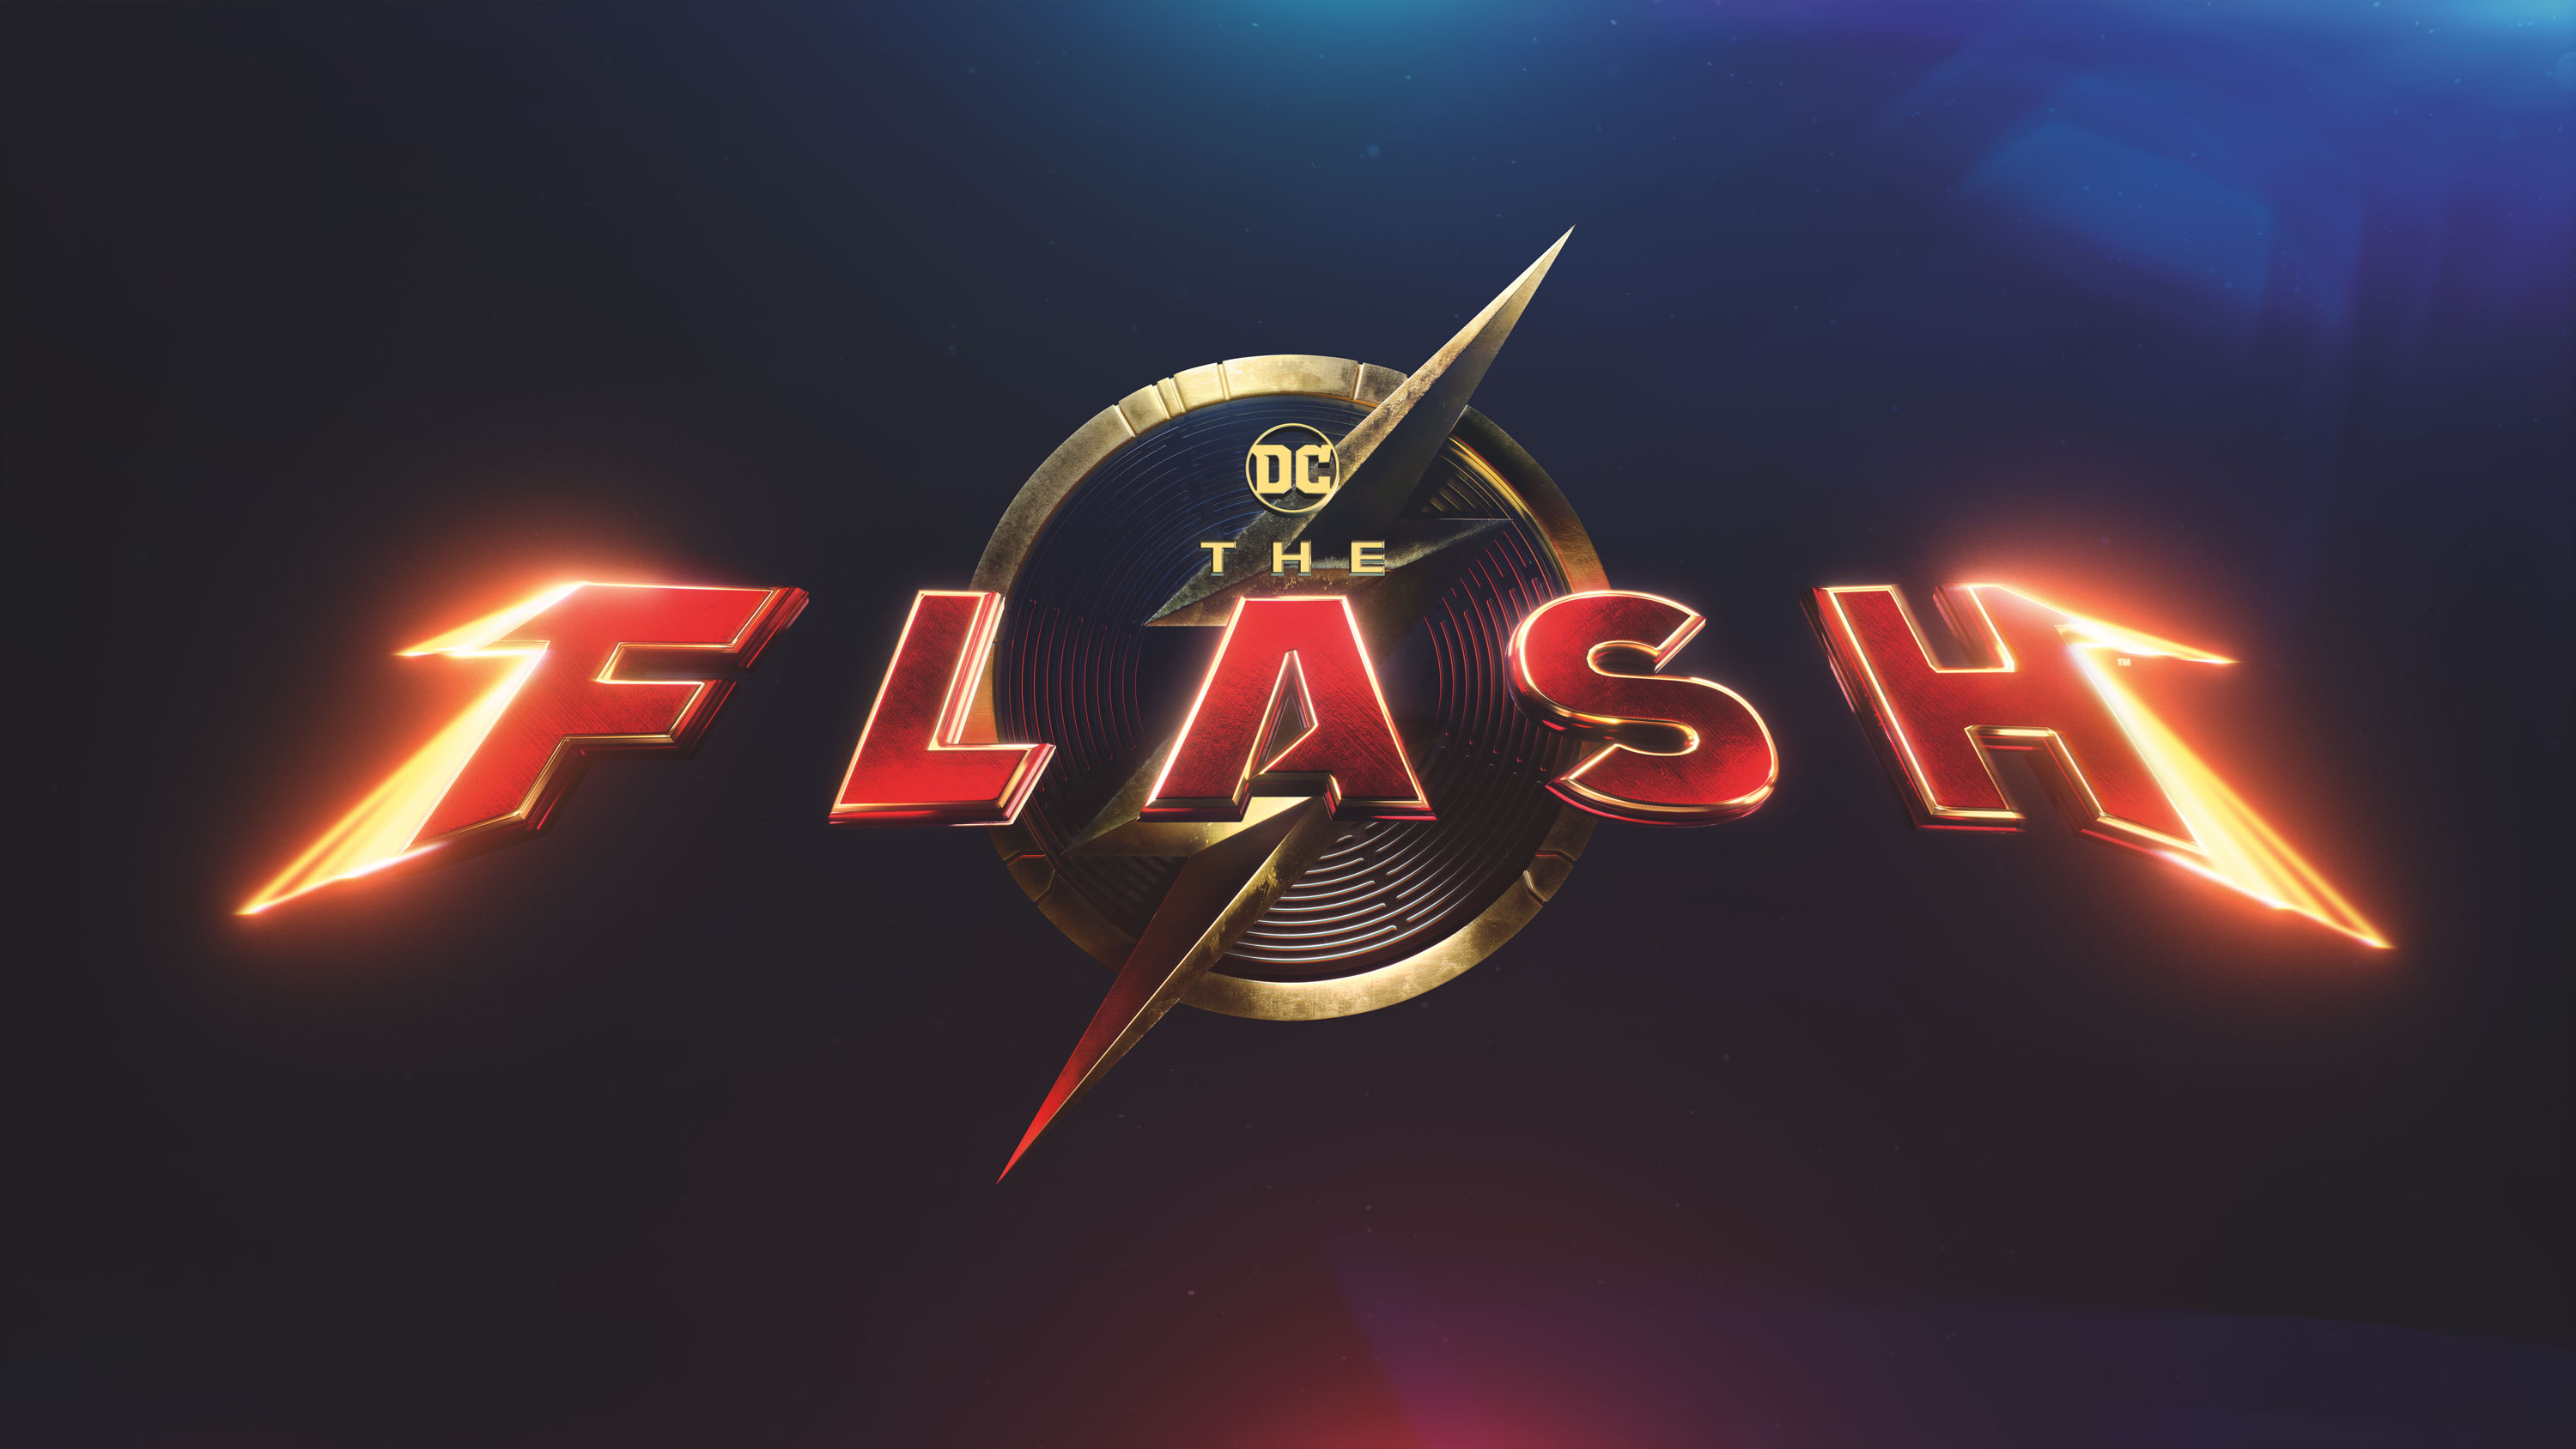 WARNER BROS. DISCOVERY GLOBAL CONSUMER PRODUCTS LAUNCHES LARGEST COLLECTION  OF THE FLASH MERCHANDISE INSPIRED BY DC SUPER HERO